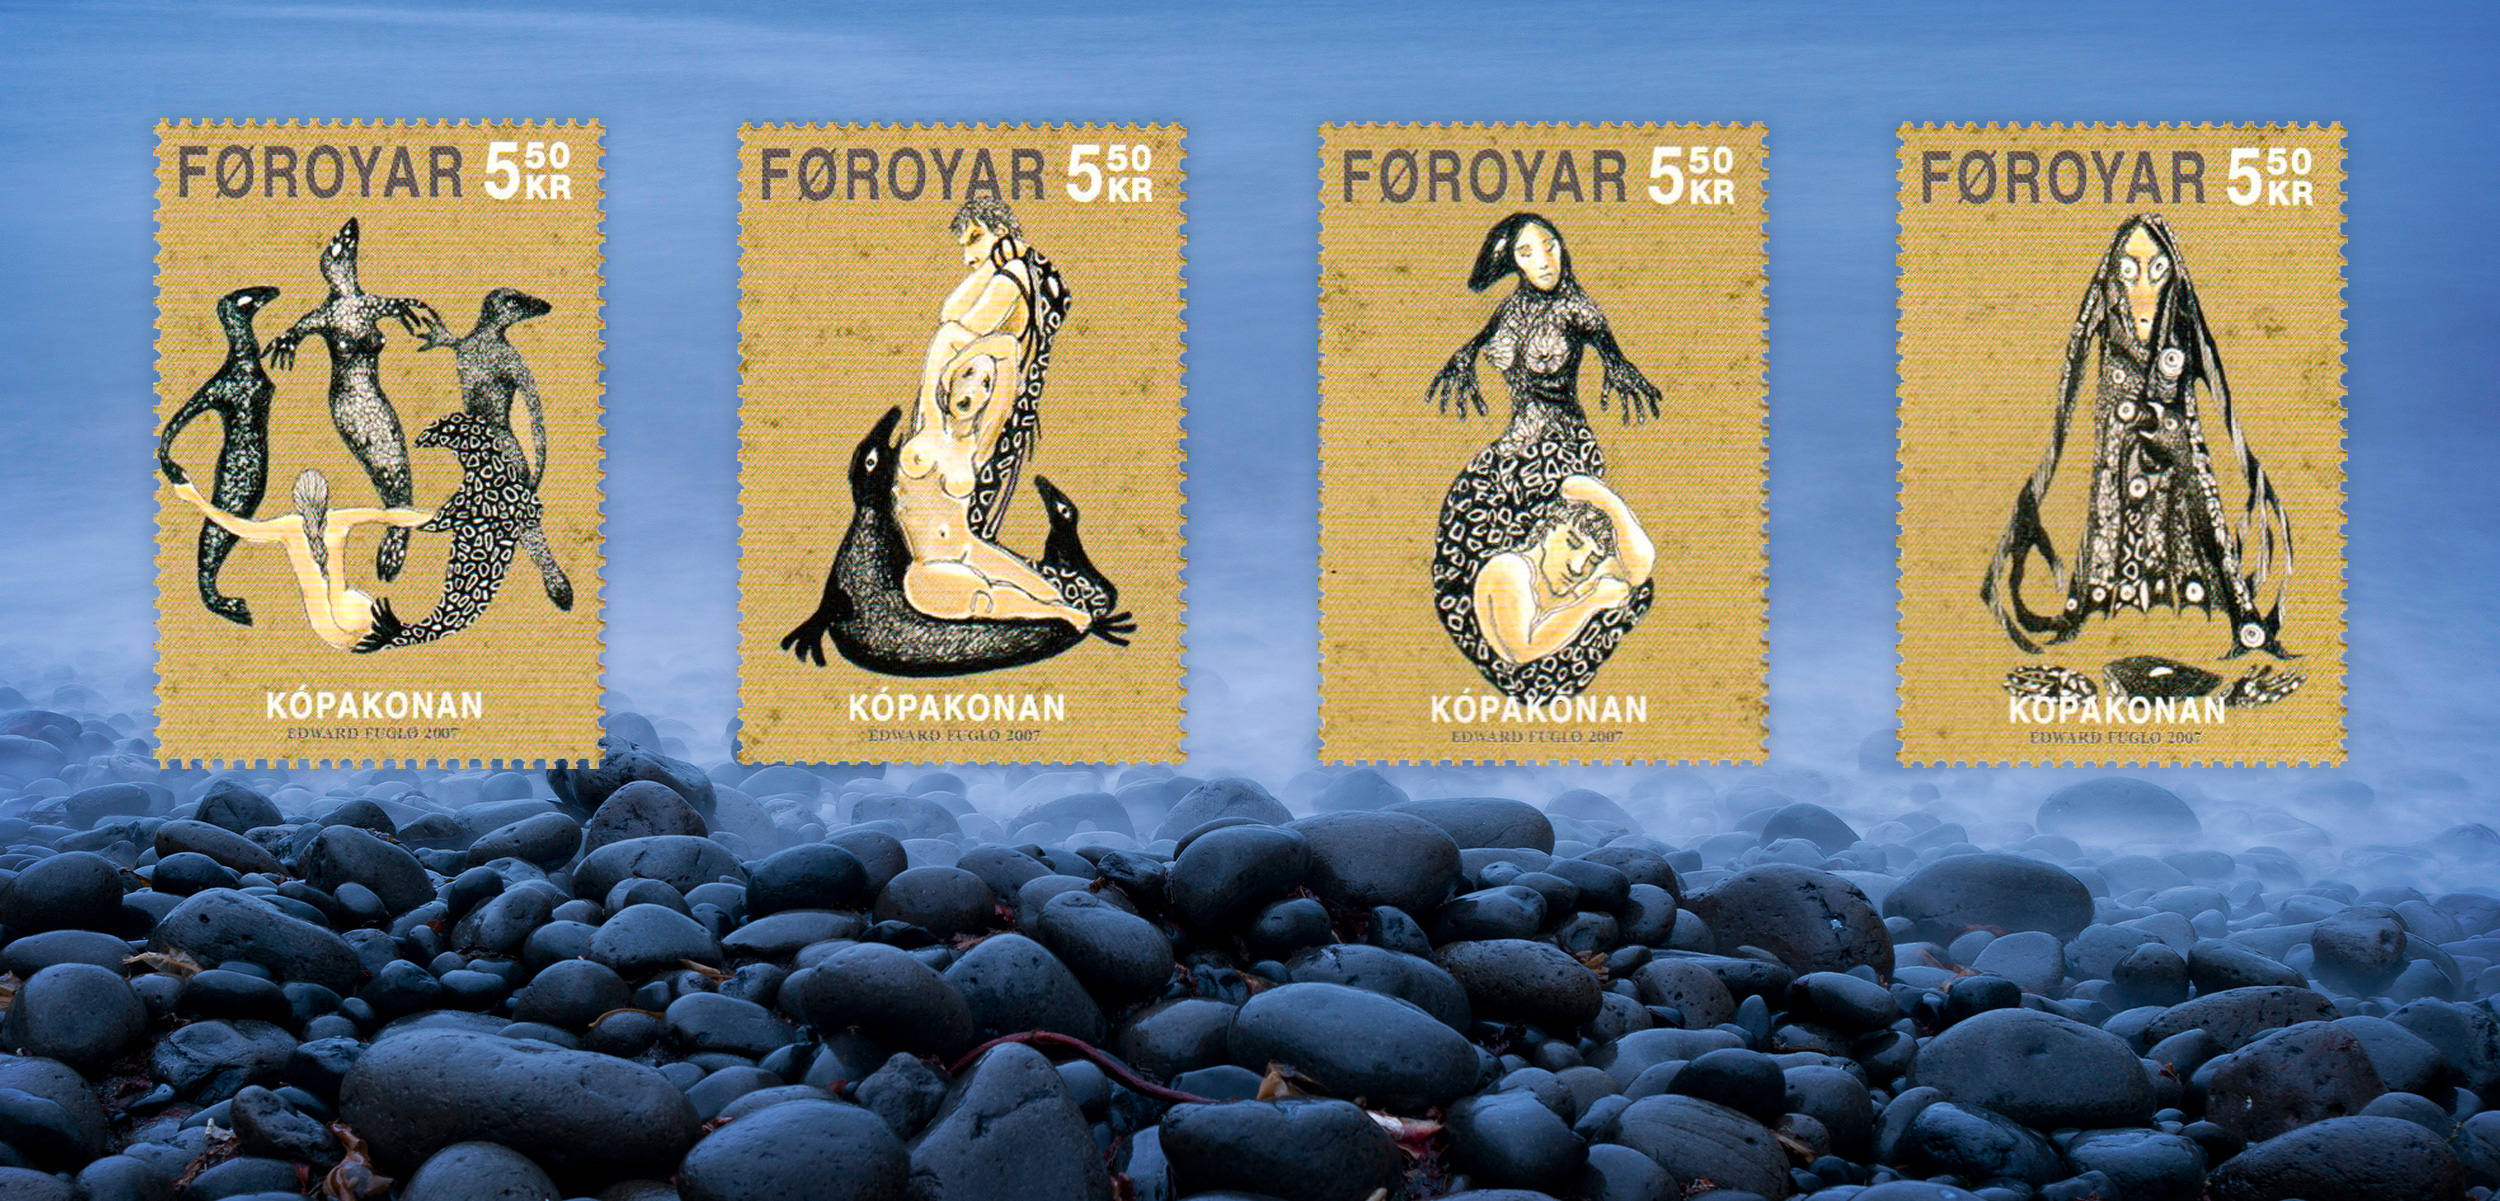 The story of Seal Woman, a Selkie, comes from the Faroe Islands, an archipelago that is part of the Kingdom of Denmark. Artist Edward Fuglø designed a series of 10 stamps, four of which are shown here. Background photo by Olaf Krüger/imagebroker/Corbis